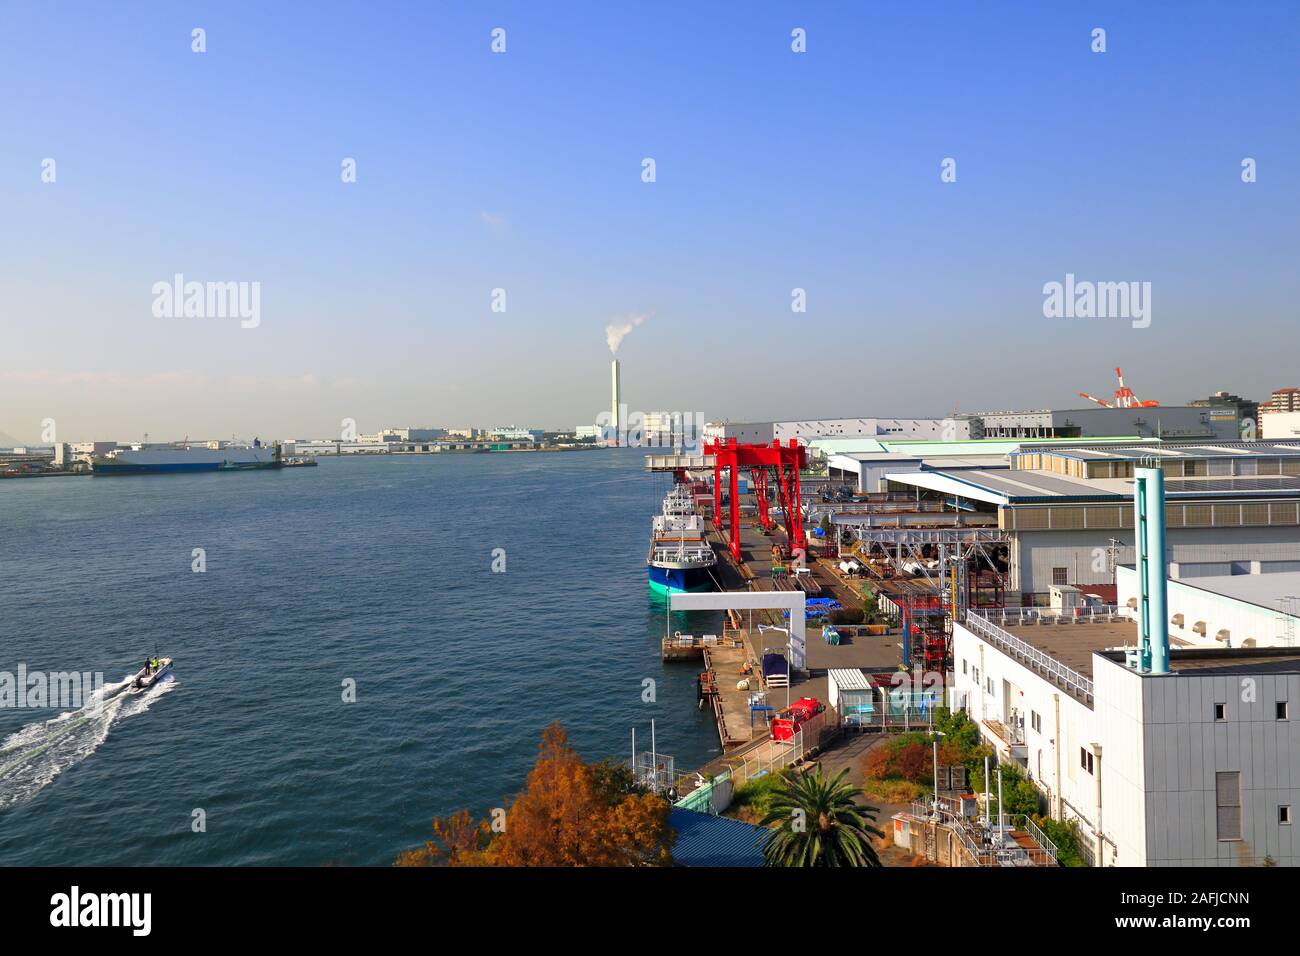 A Cargo Hold Japan Coastal Ship is moored at  Industrial port  surrounded by factory buildings on Osaka Bay,Japan. Stock Photo